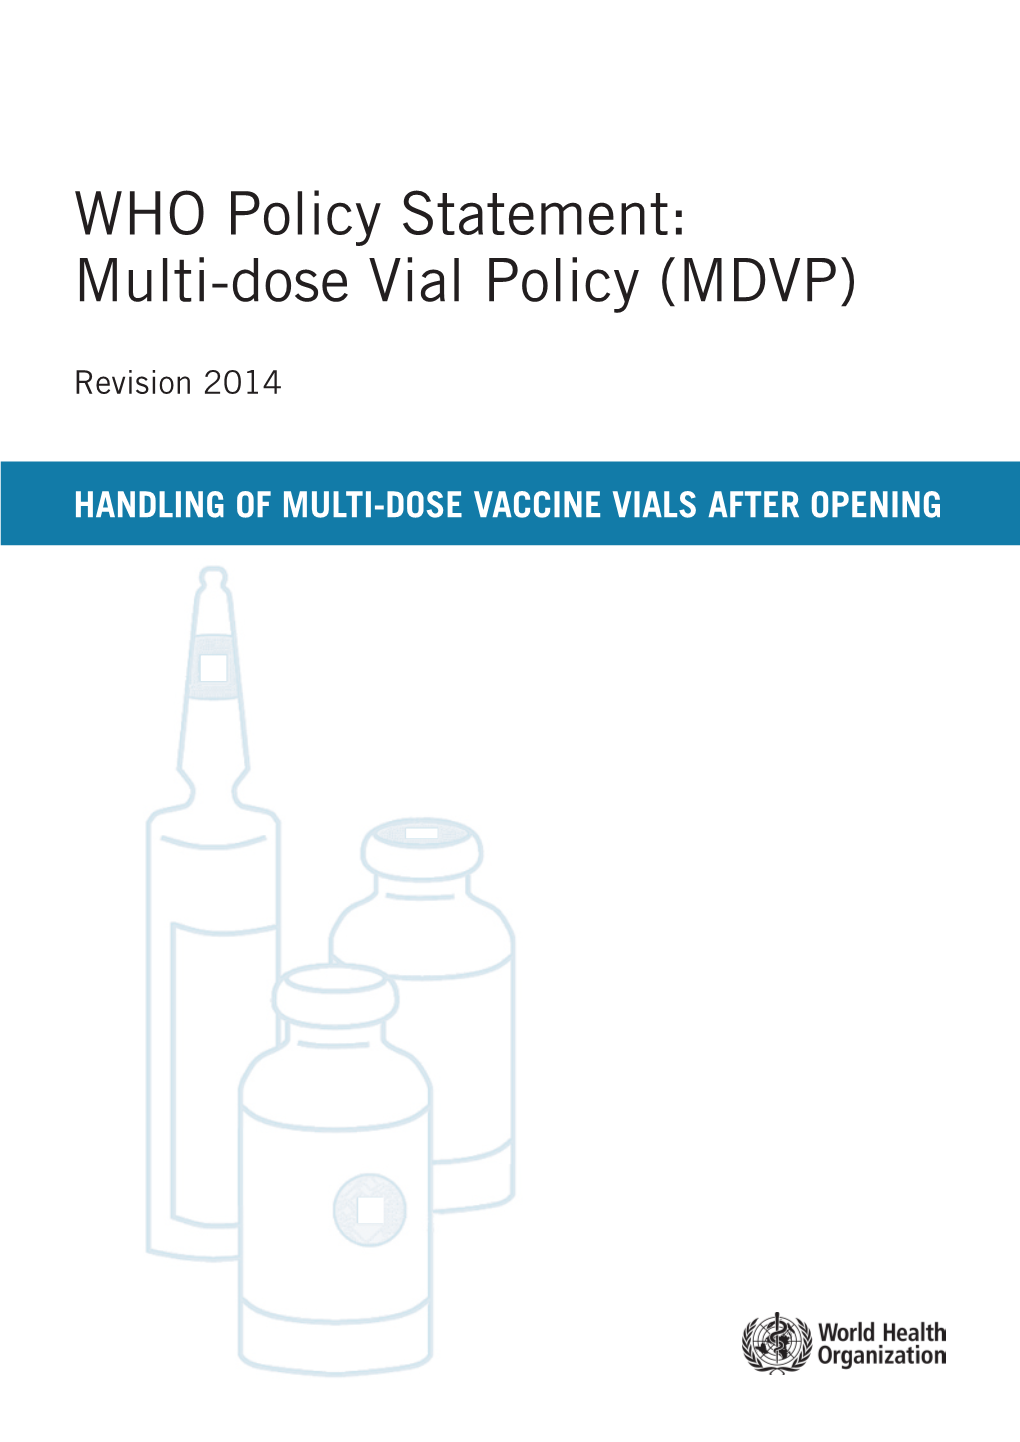 Multi-Dose Vial Policy (MDVP)